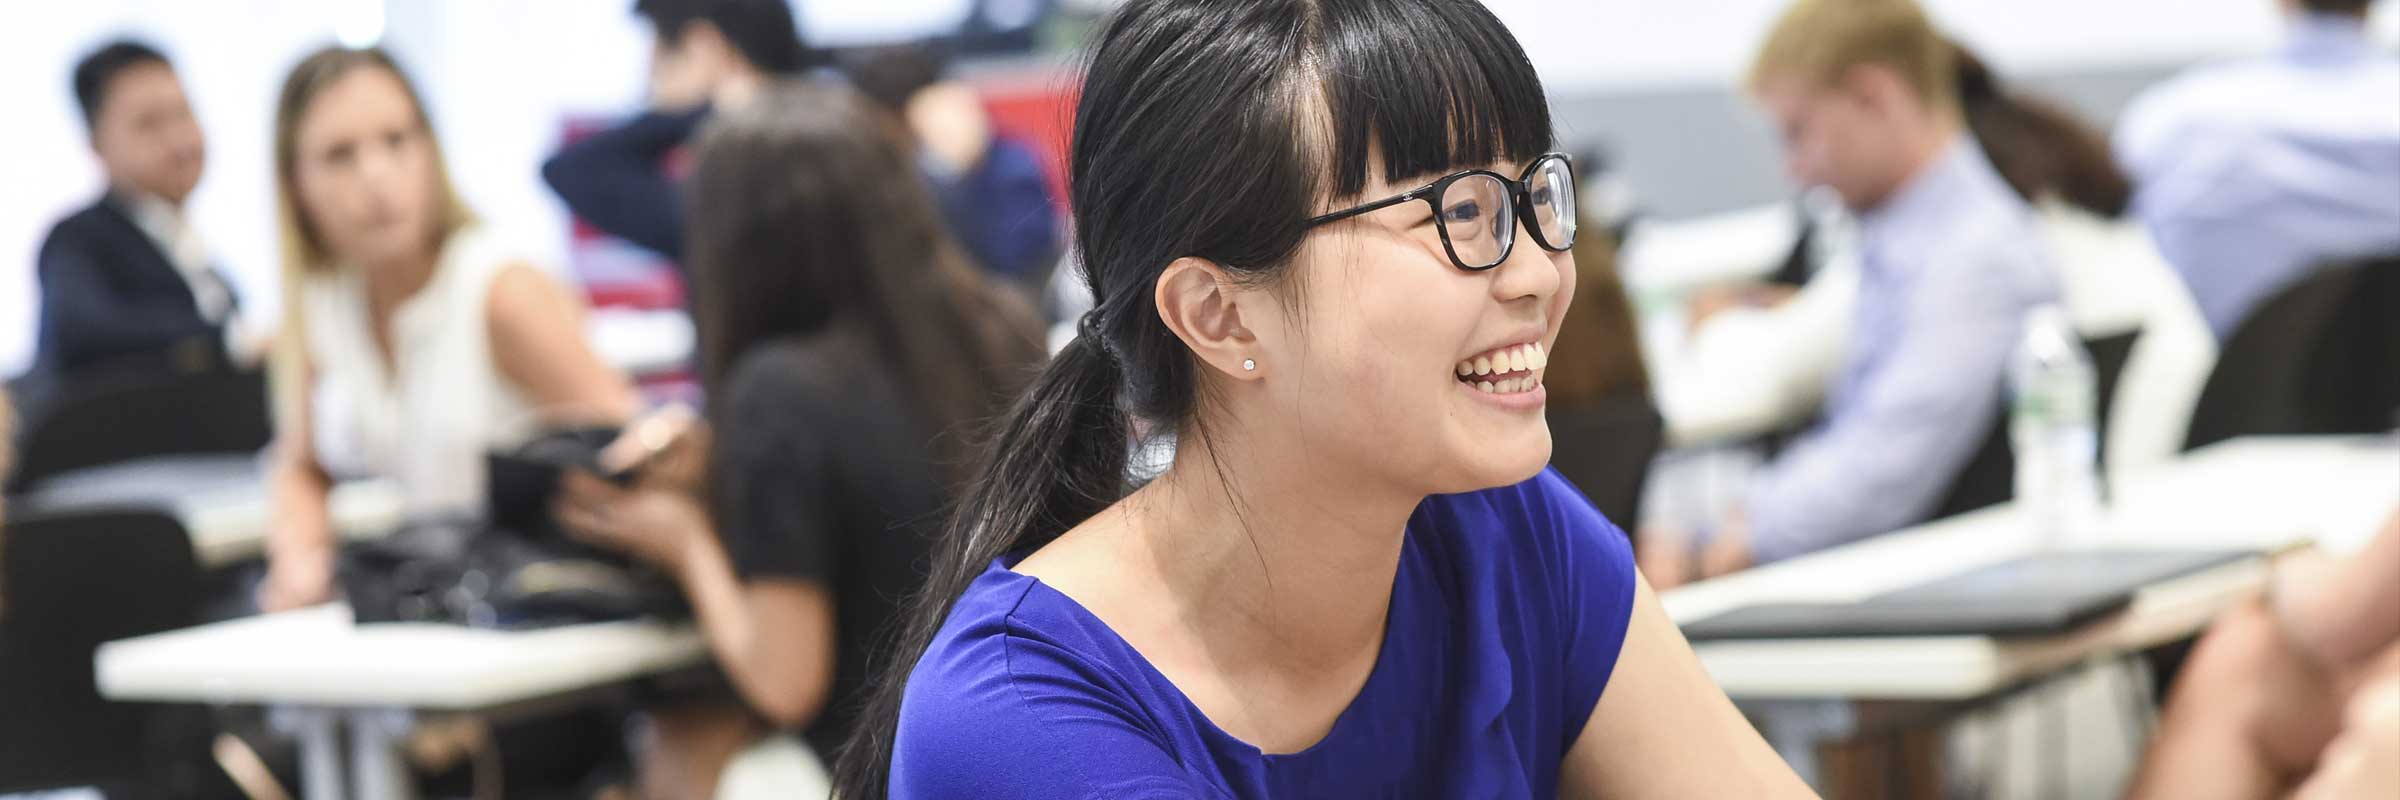 A female student sitting in class smiling.